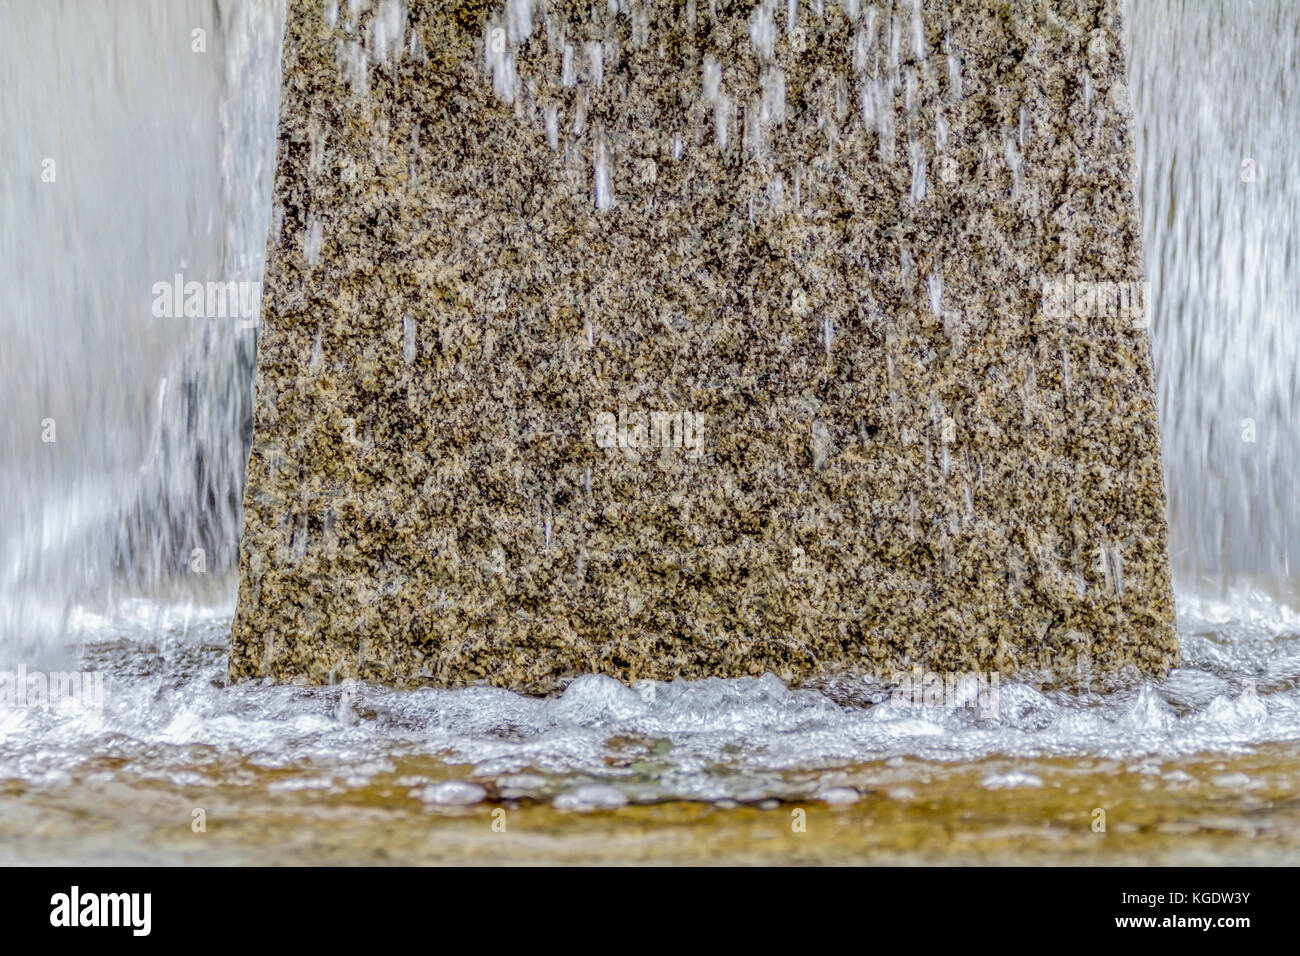 waterspout fountain detail including a water surface with small waves, water drops and splashes in stony ambiance Stock Photo